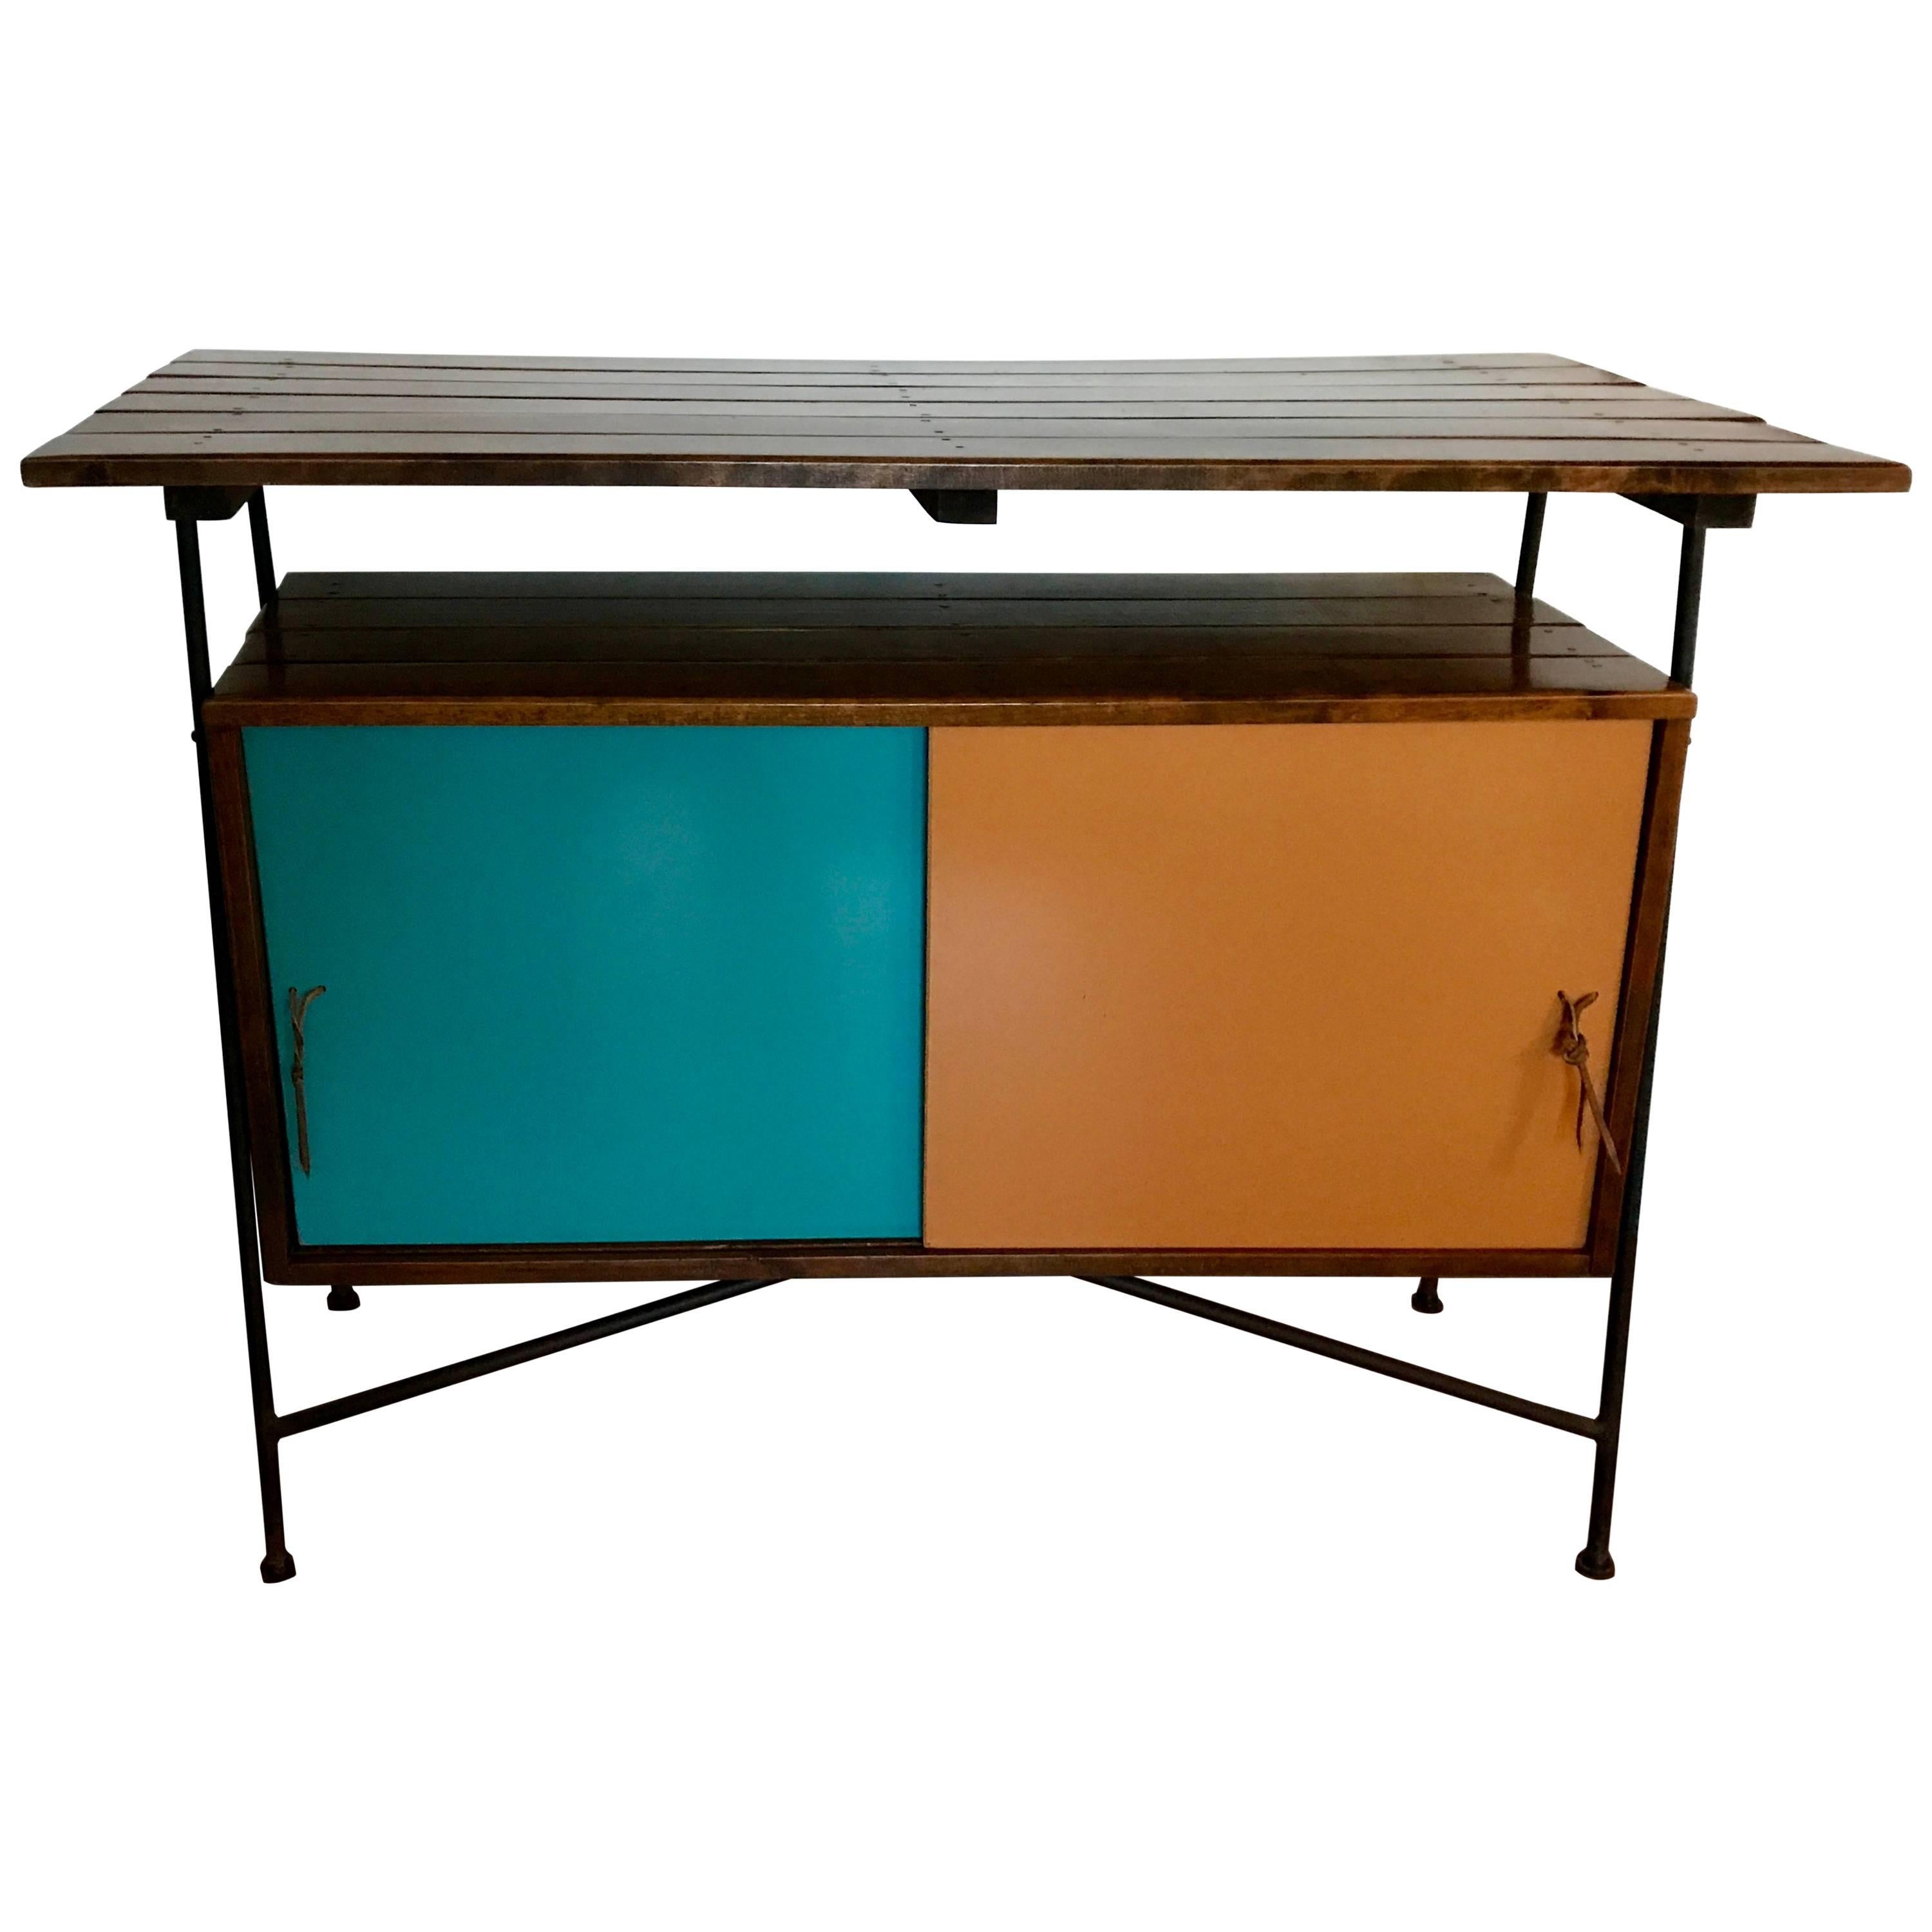 Mid Century Arthur Umanoff Cocktail Bar or Sideboard Credenza for Raymor, 1950's For Sale